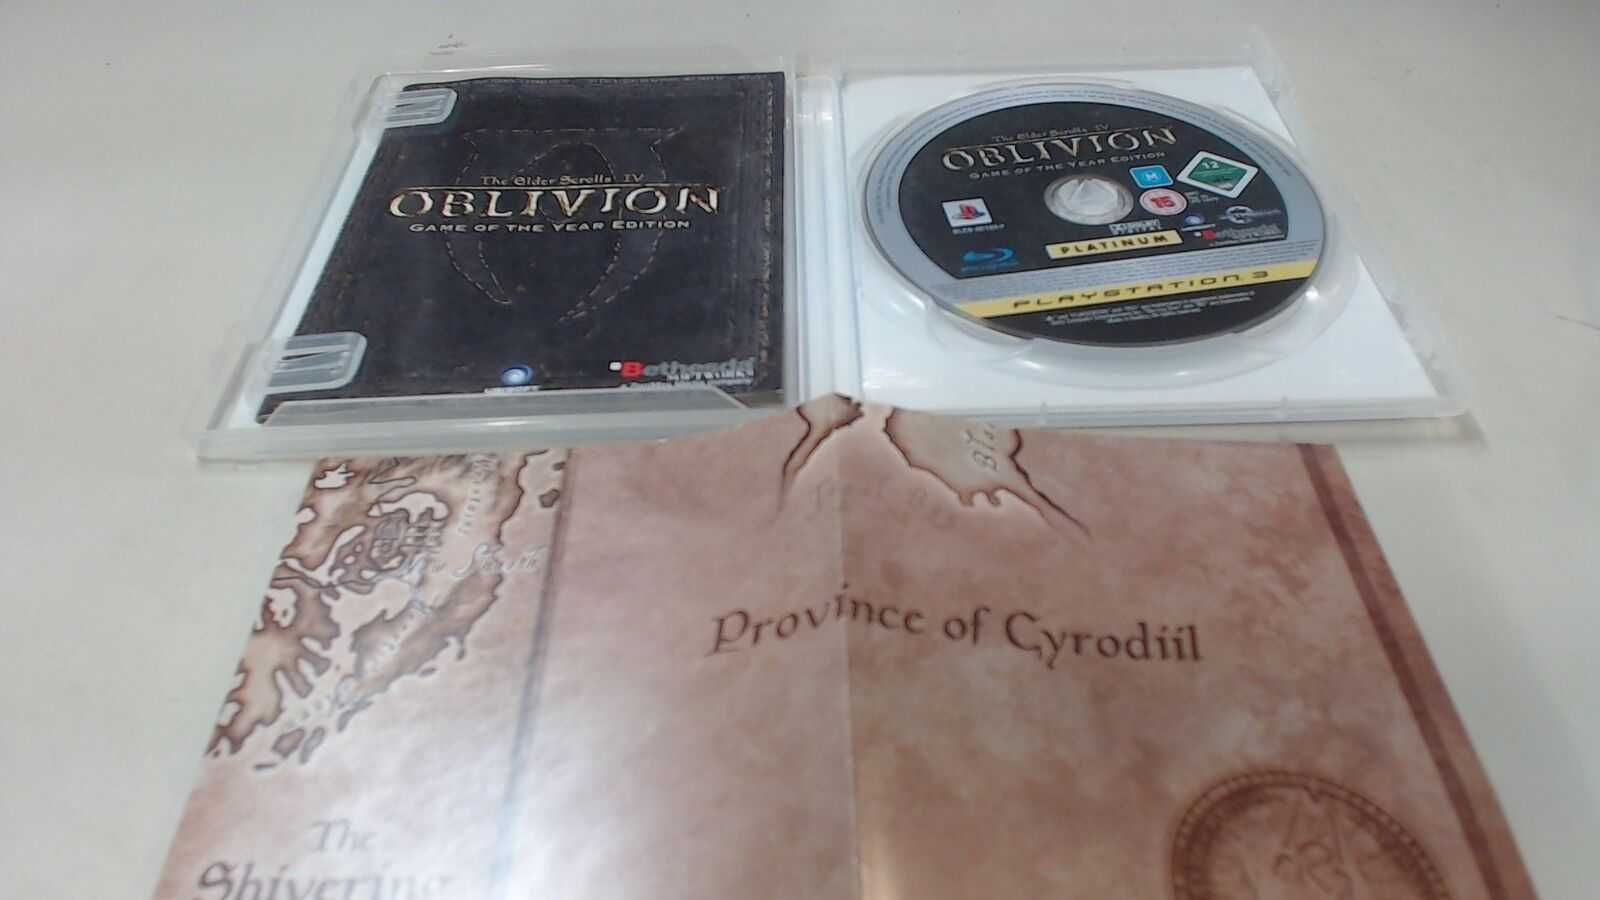 Ps3 Oblivion game of the year edition, карта, мануал, новый, игра